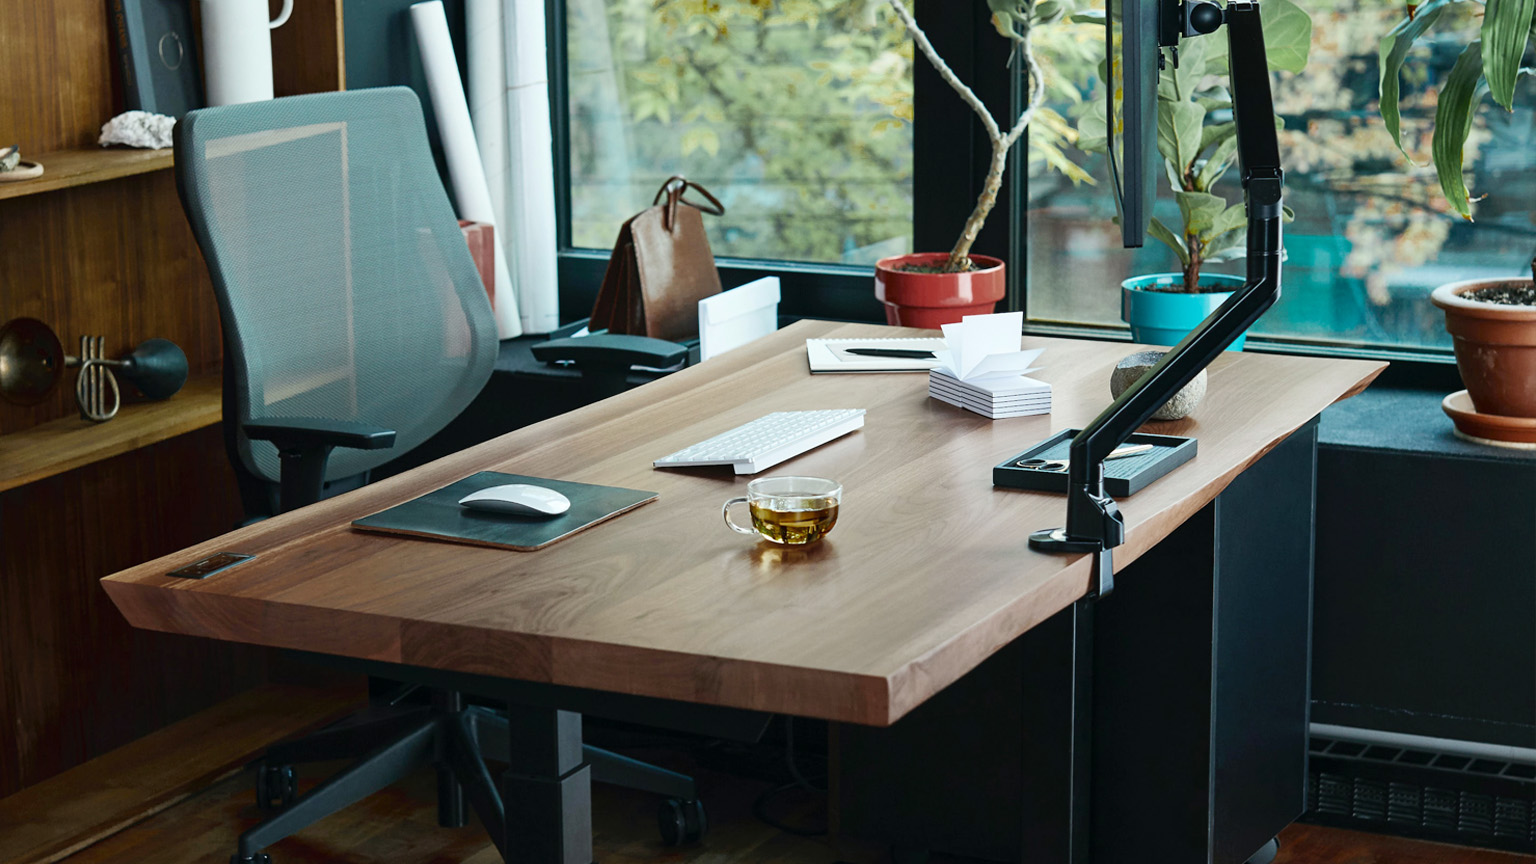 10 Best Desk Cable Management Ideas For A Clutter-free Workspace